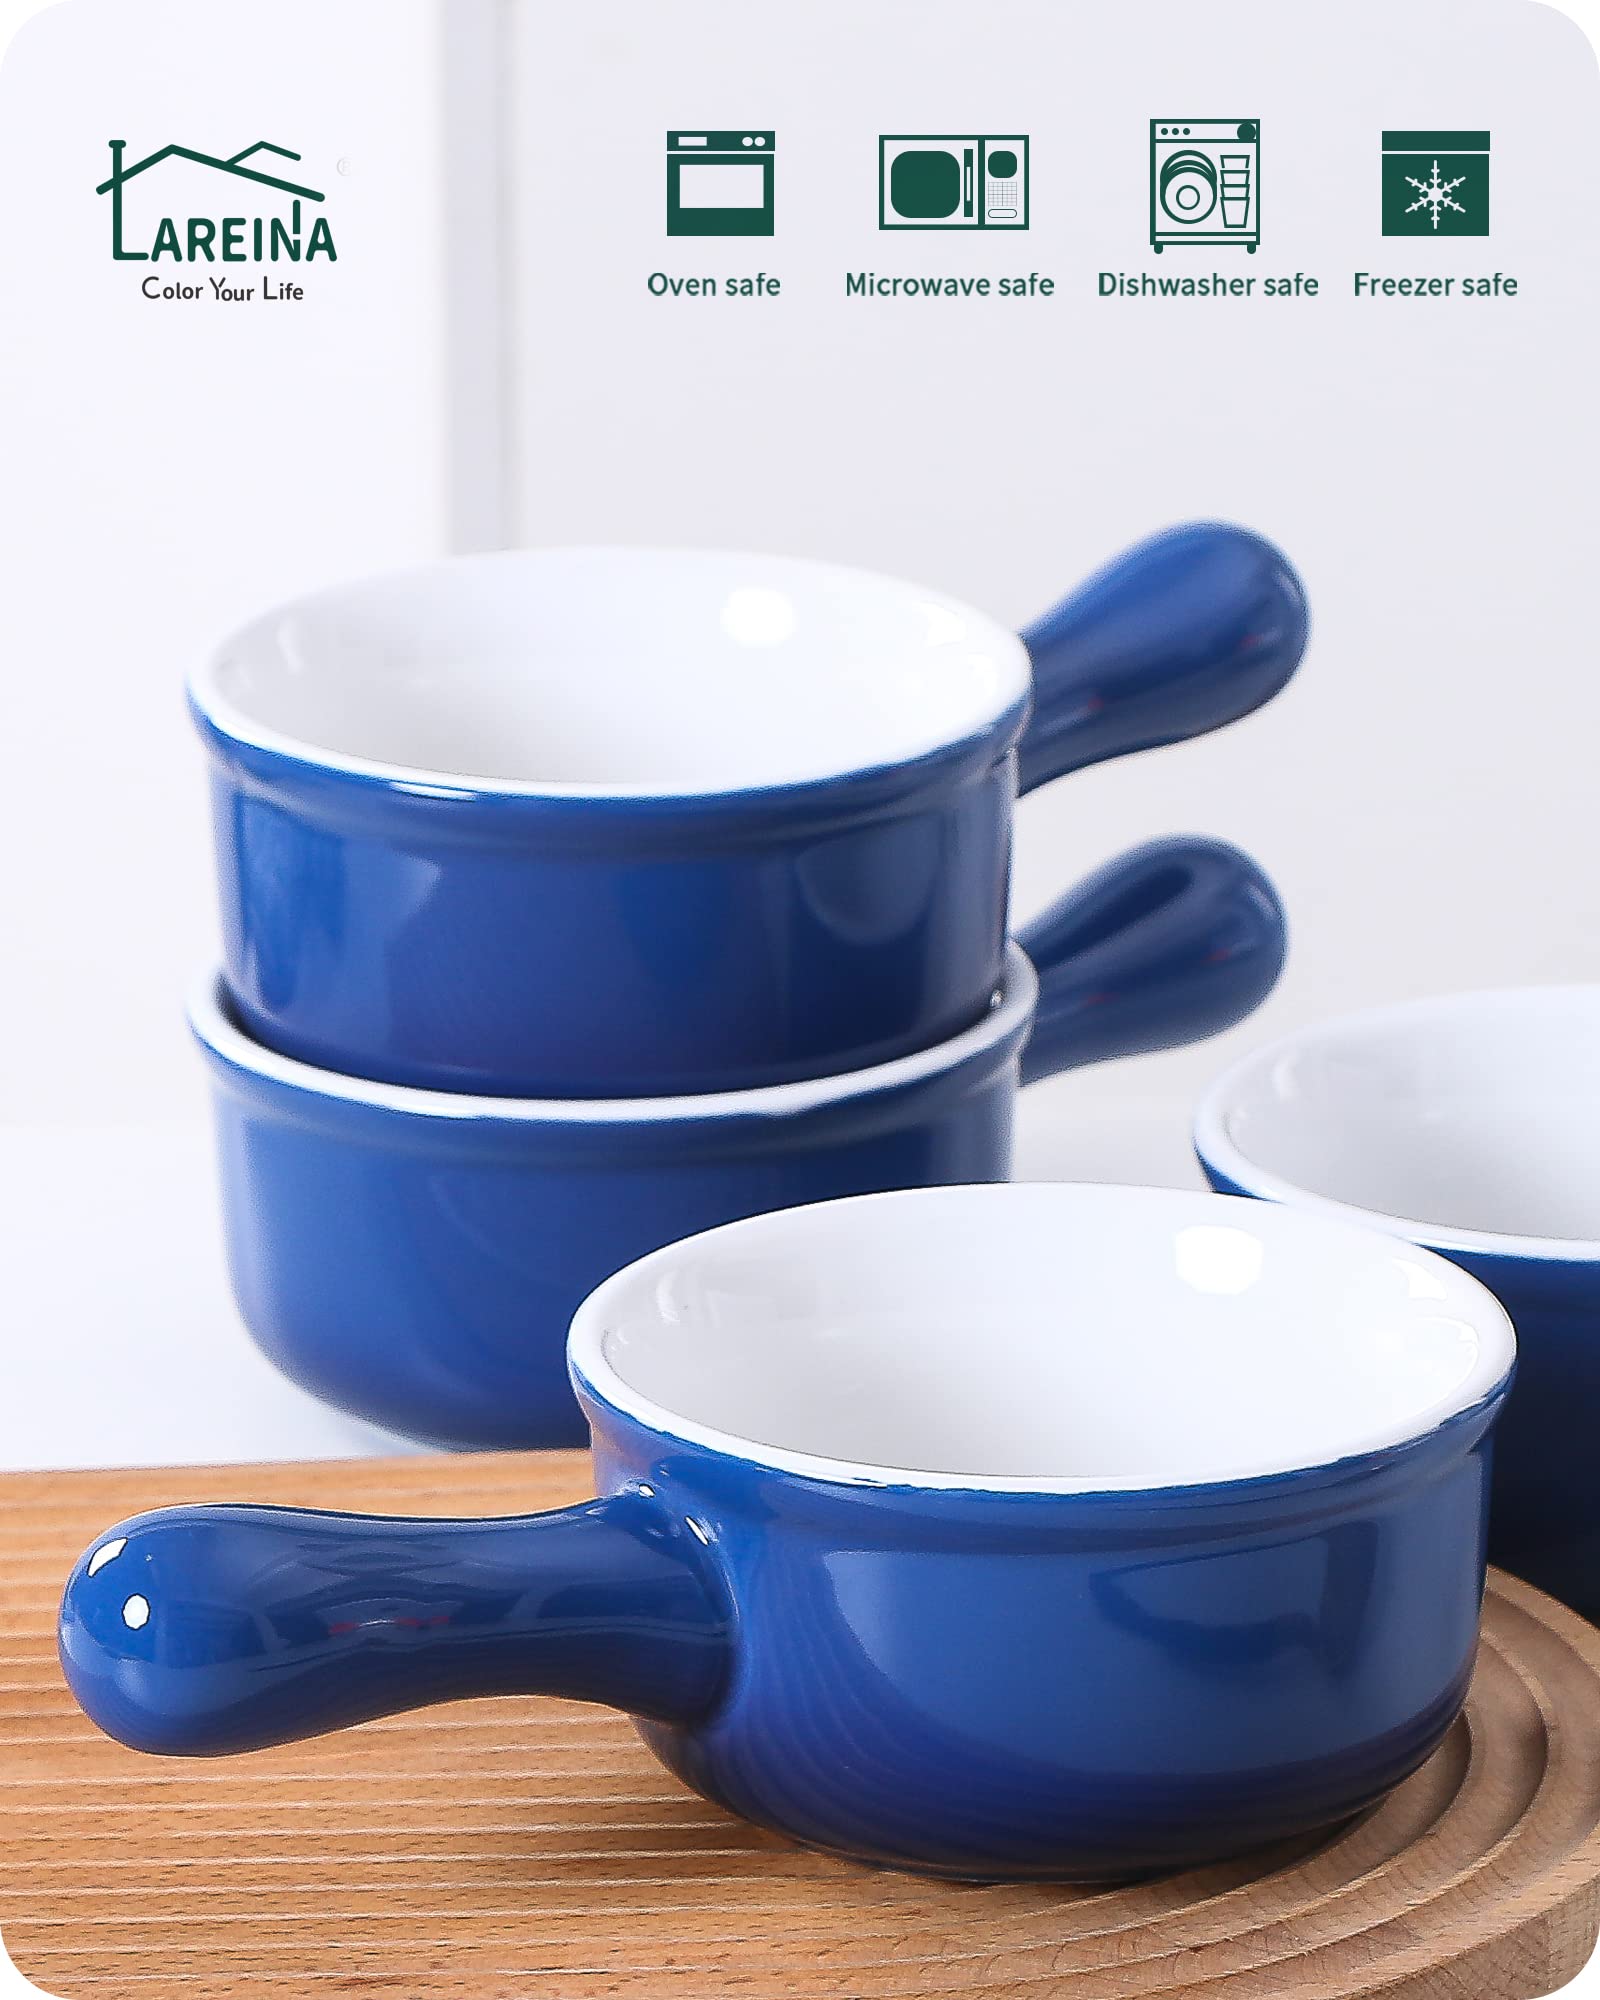 French Onion Soup Bowls with Handles, Lareina 15 OZ Ceramic Soup Crock, Porcelain 5 Inch Microwave and Oven Safe Bowls, Set of 4, Blue